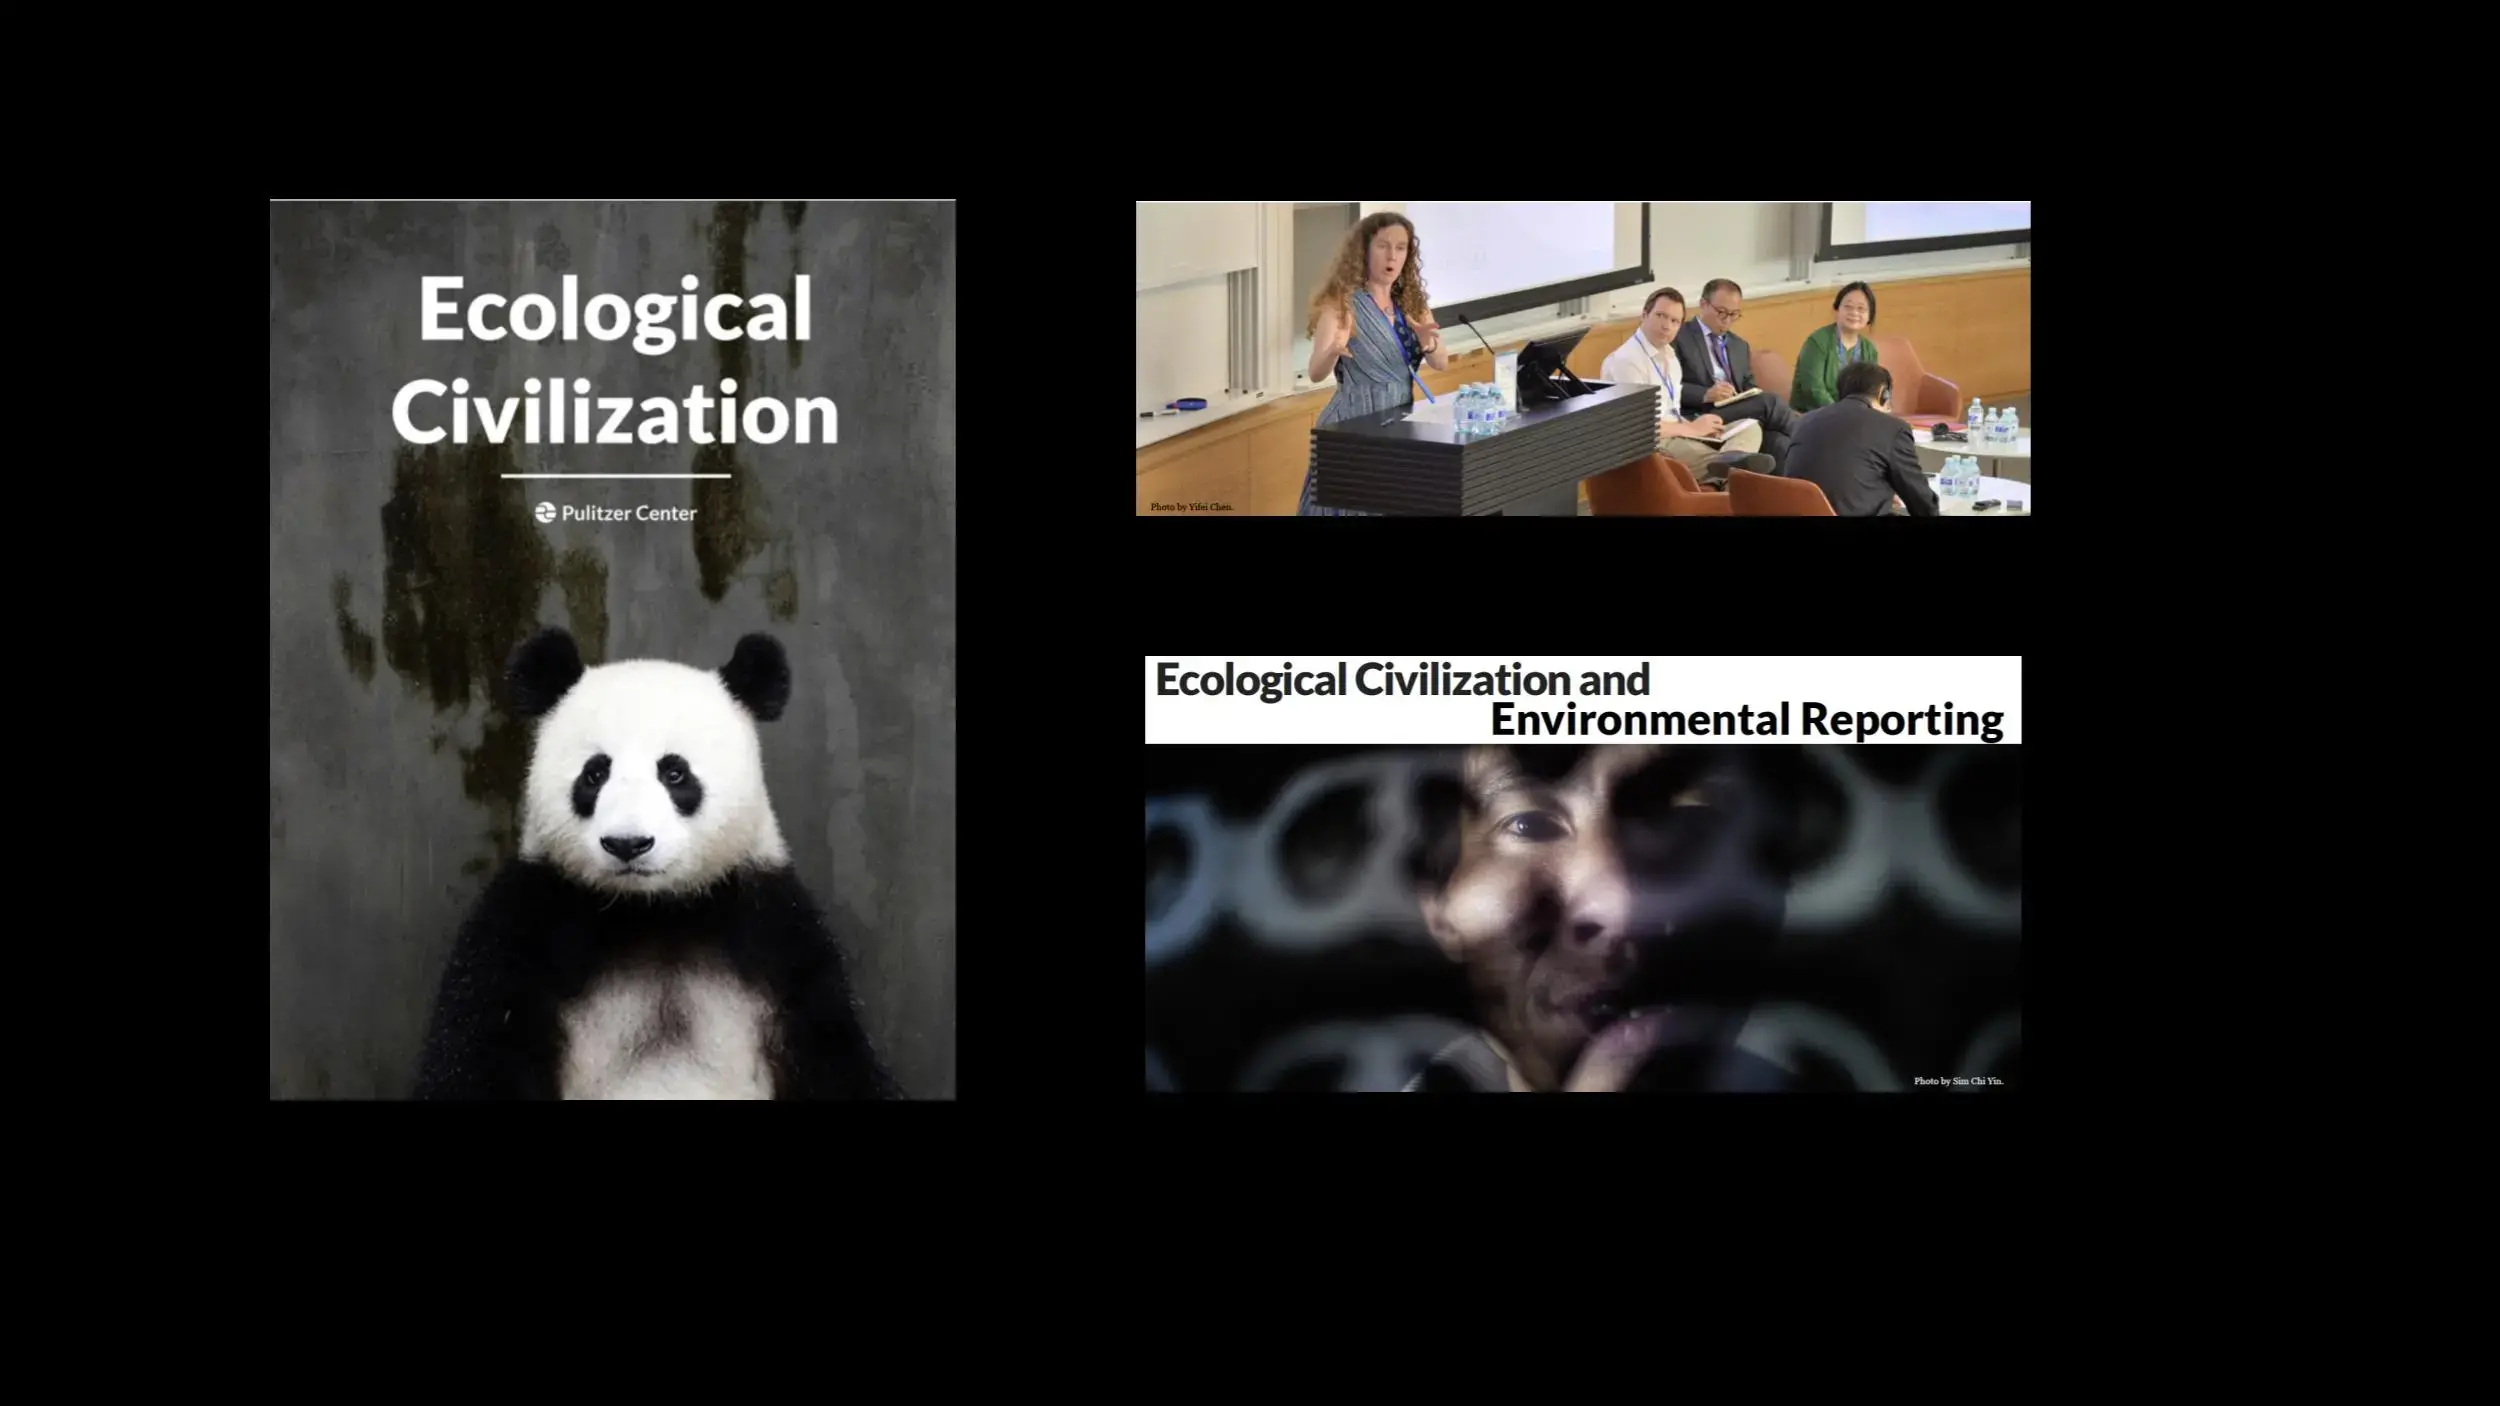 Ecological Civilization and Environmental Reporting